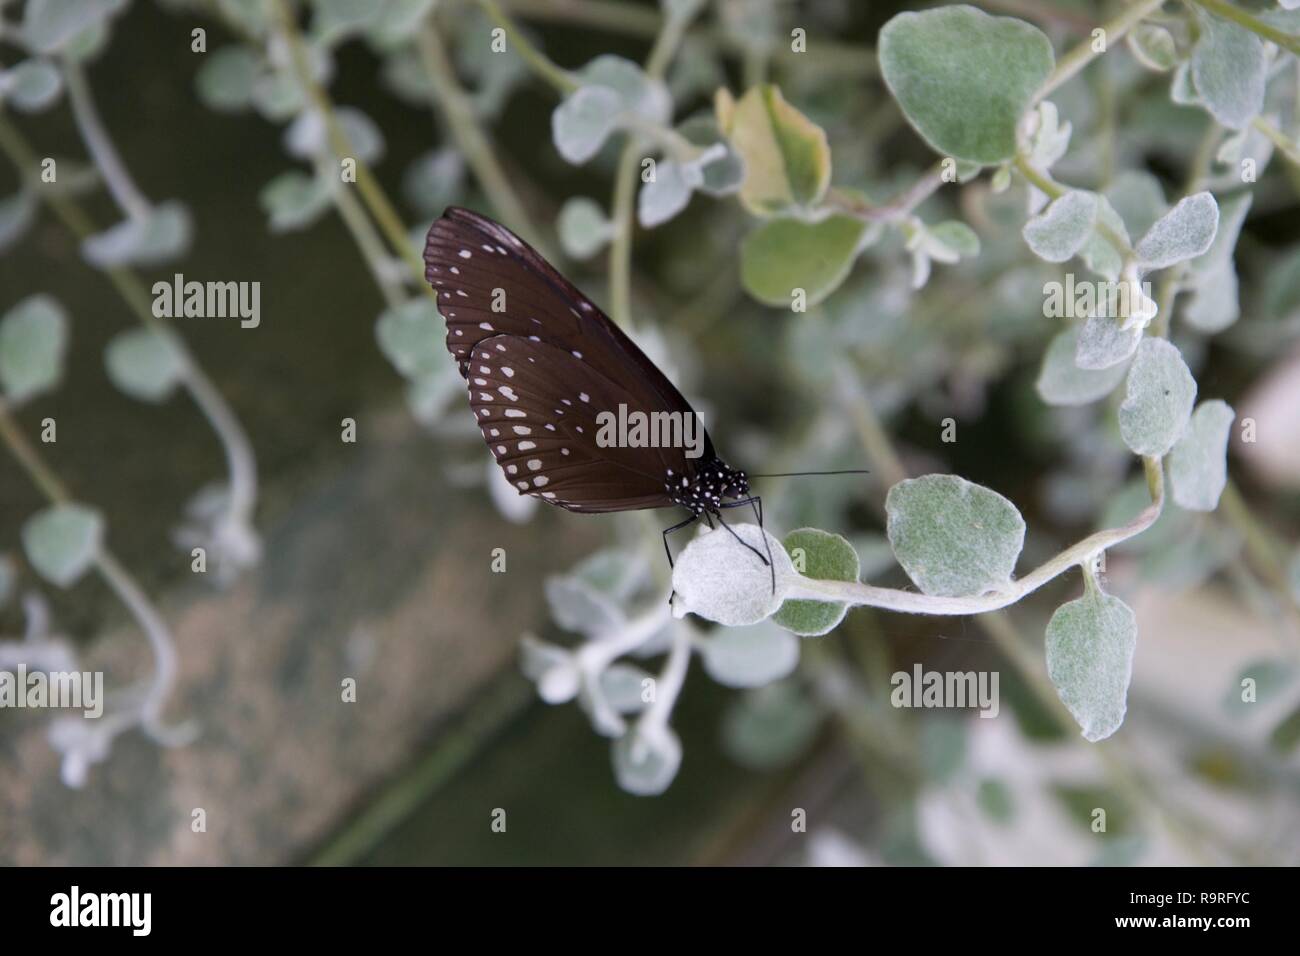 A brown butterfly speckled with delicate white spots on its wings sits on a plant with furry white and green leaves Stock Photo